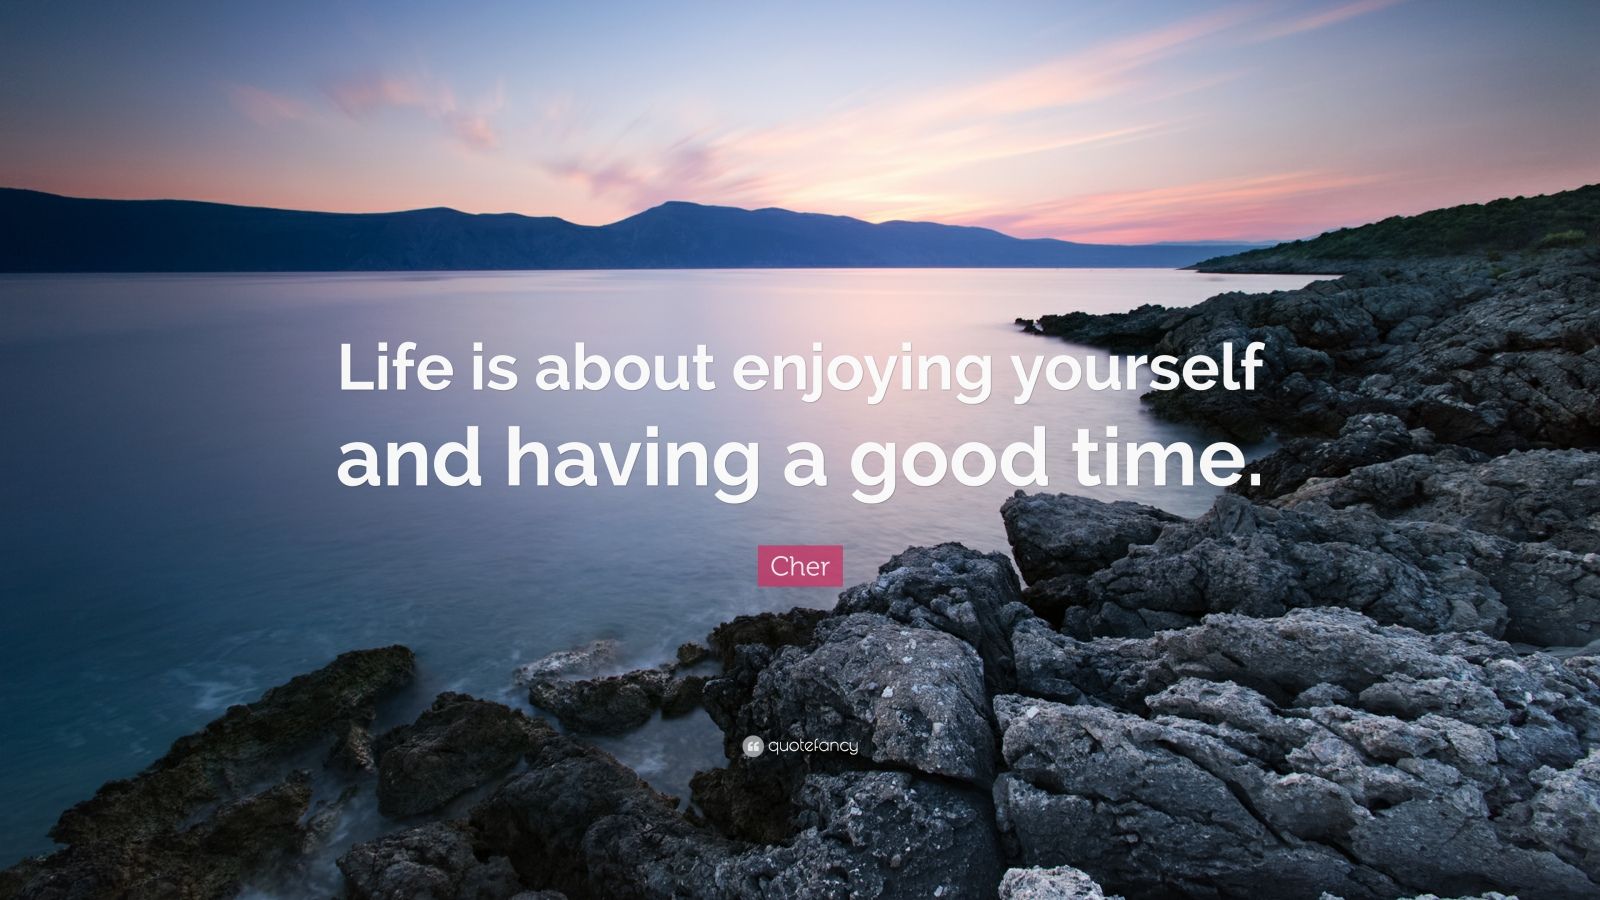 Cher quote: Life is about enjoying yourself and having a good time.